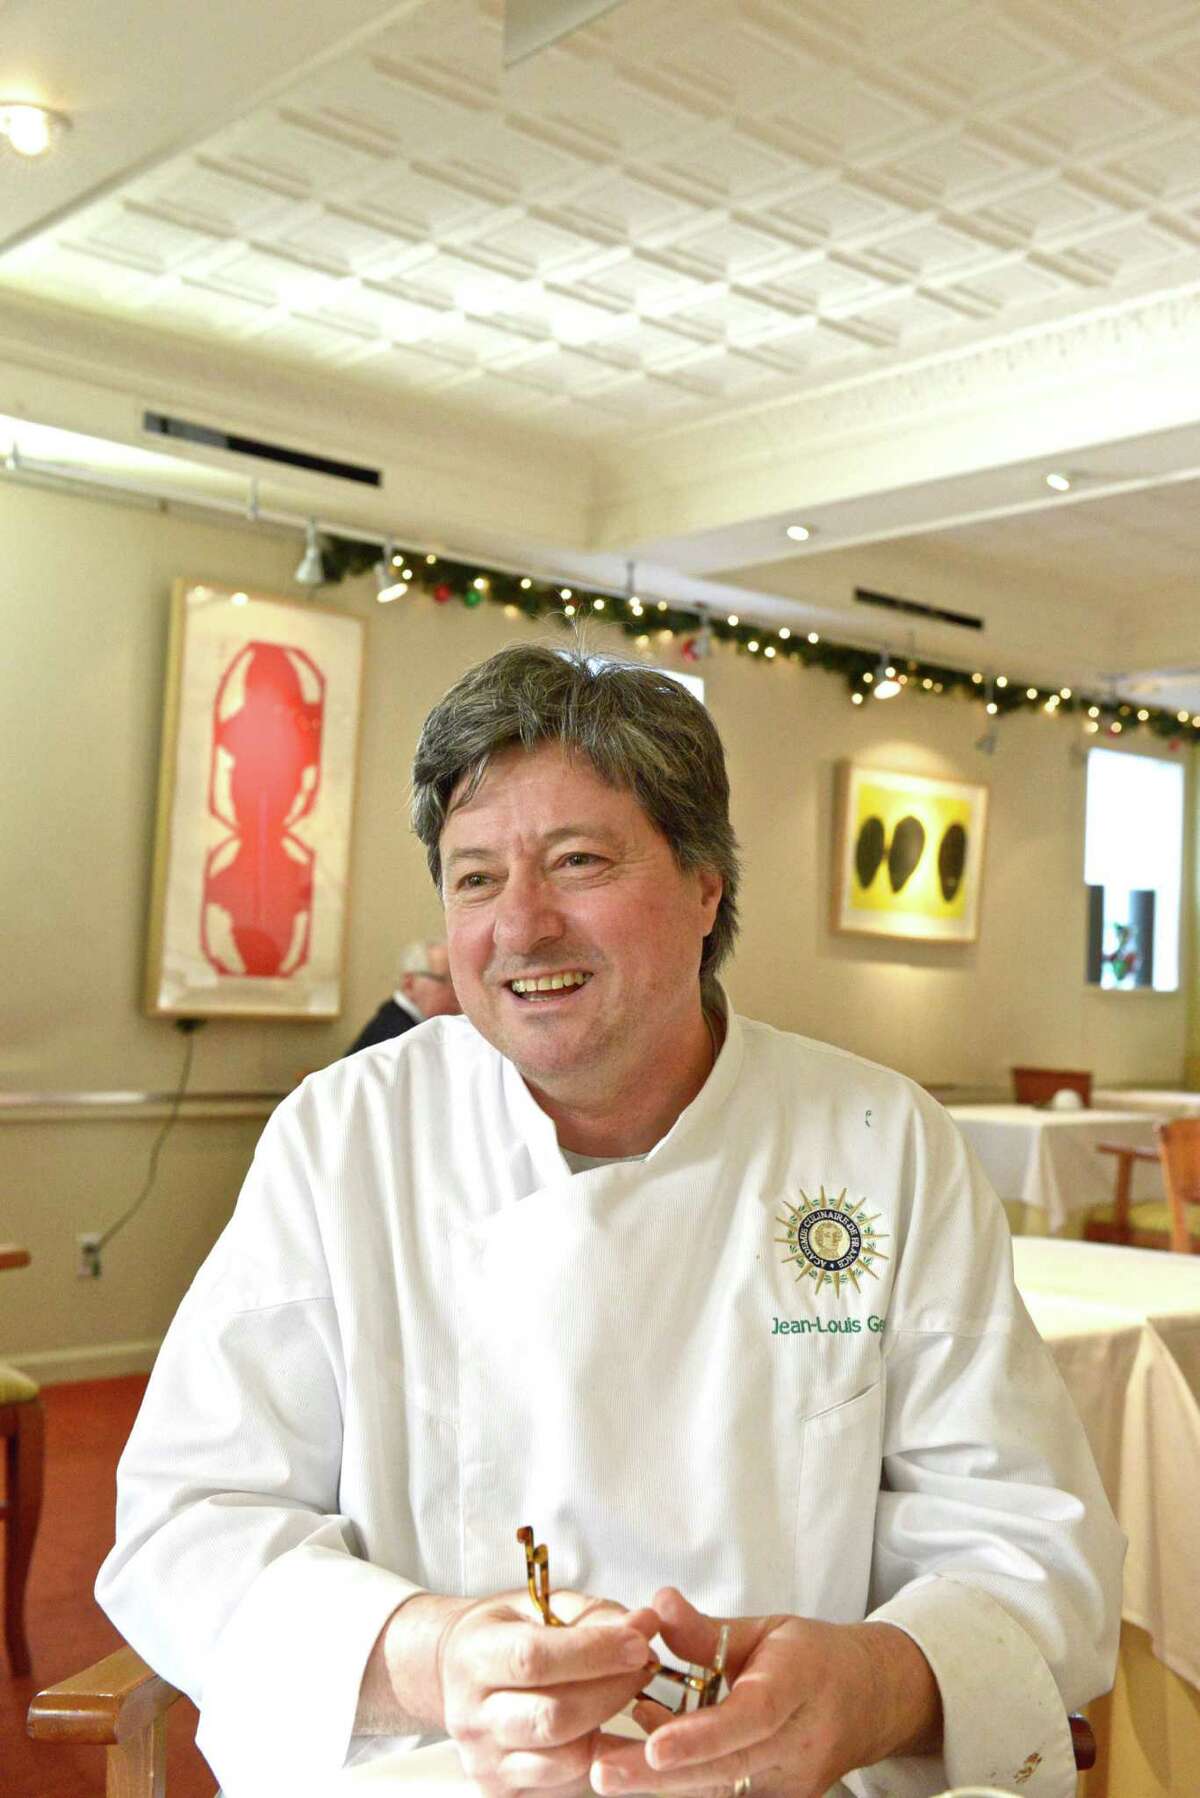 French Chef Jean-Louis Gerin takes a moment to reflect on his time - nearly 30 years - at his Lewis Street restaurant, which is closing today. Gerin is taking a position as vice president of Culinary Operations and Executive Chef at the New England Culinary Institute in Vermont. "Education has always been a big part of what I do," says Gerin.